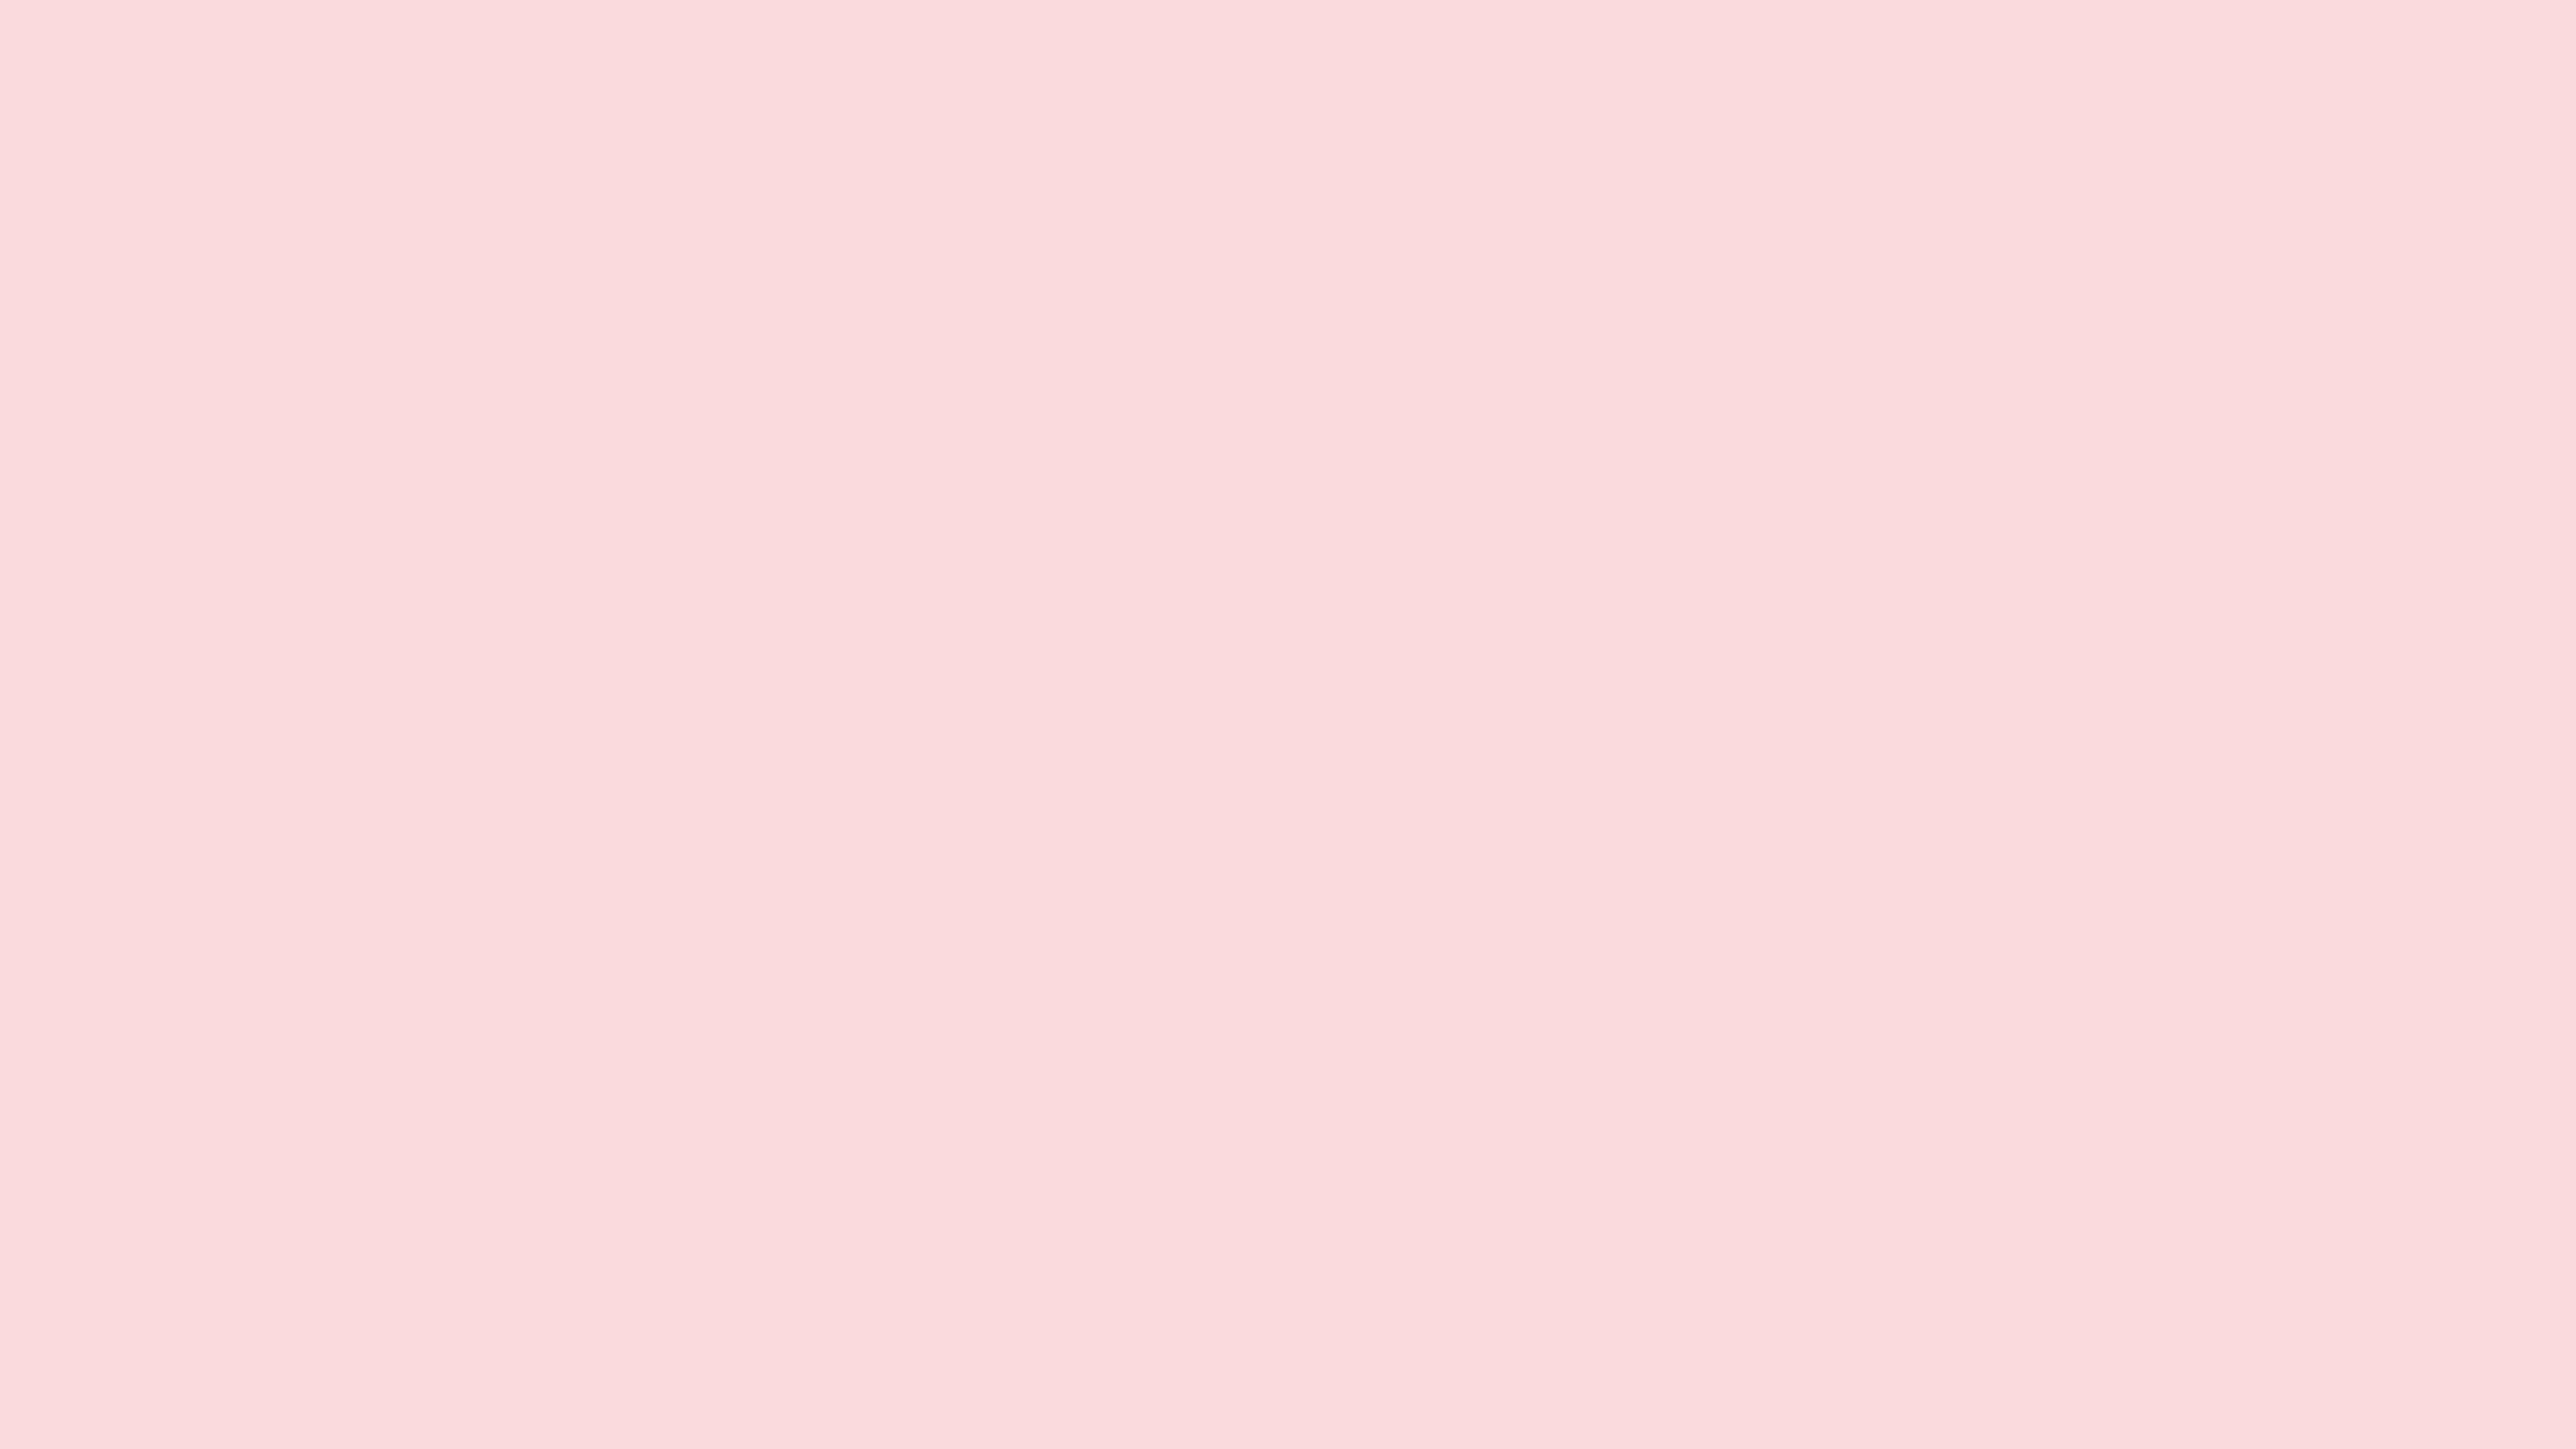 7680x4320 Pale Pink Solid Color Background